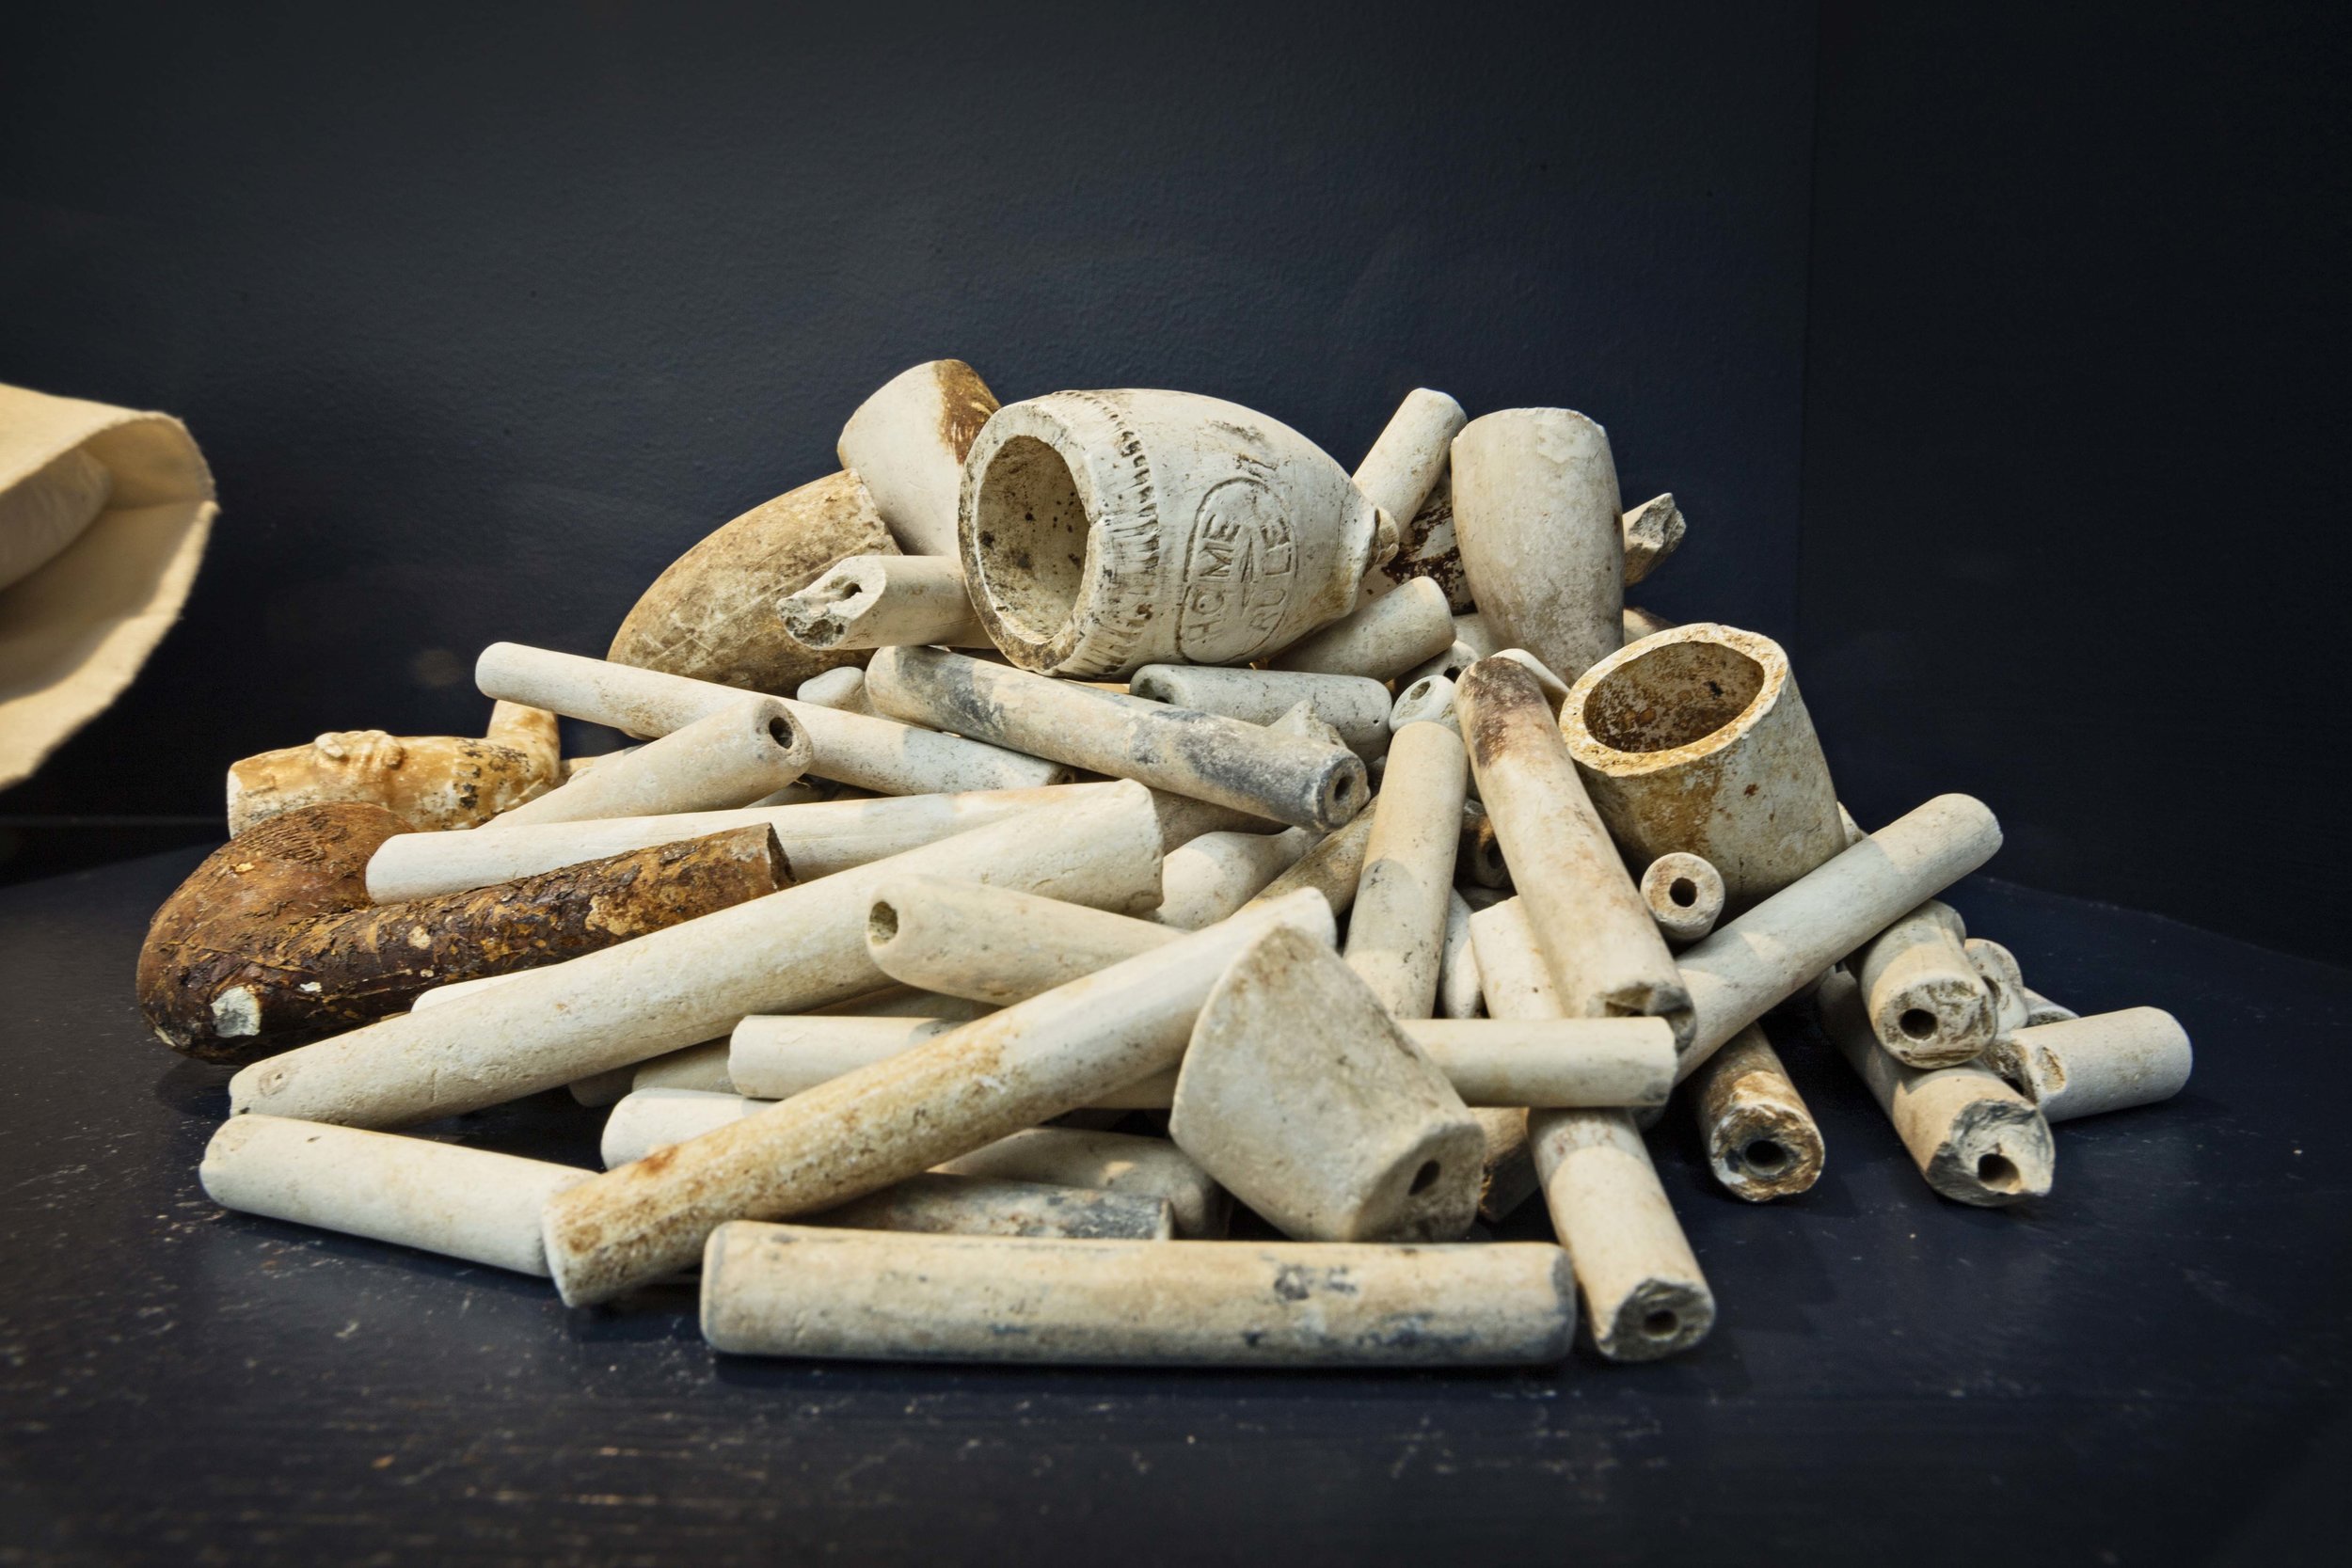 Archaeological Debris, Collected Clay Tobacco Pipes and Shards, Canada, England, Scotland